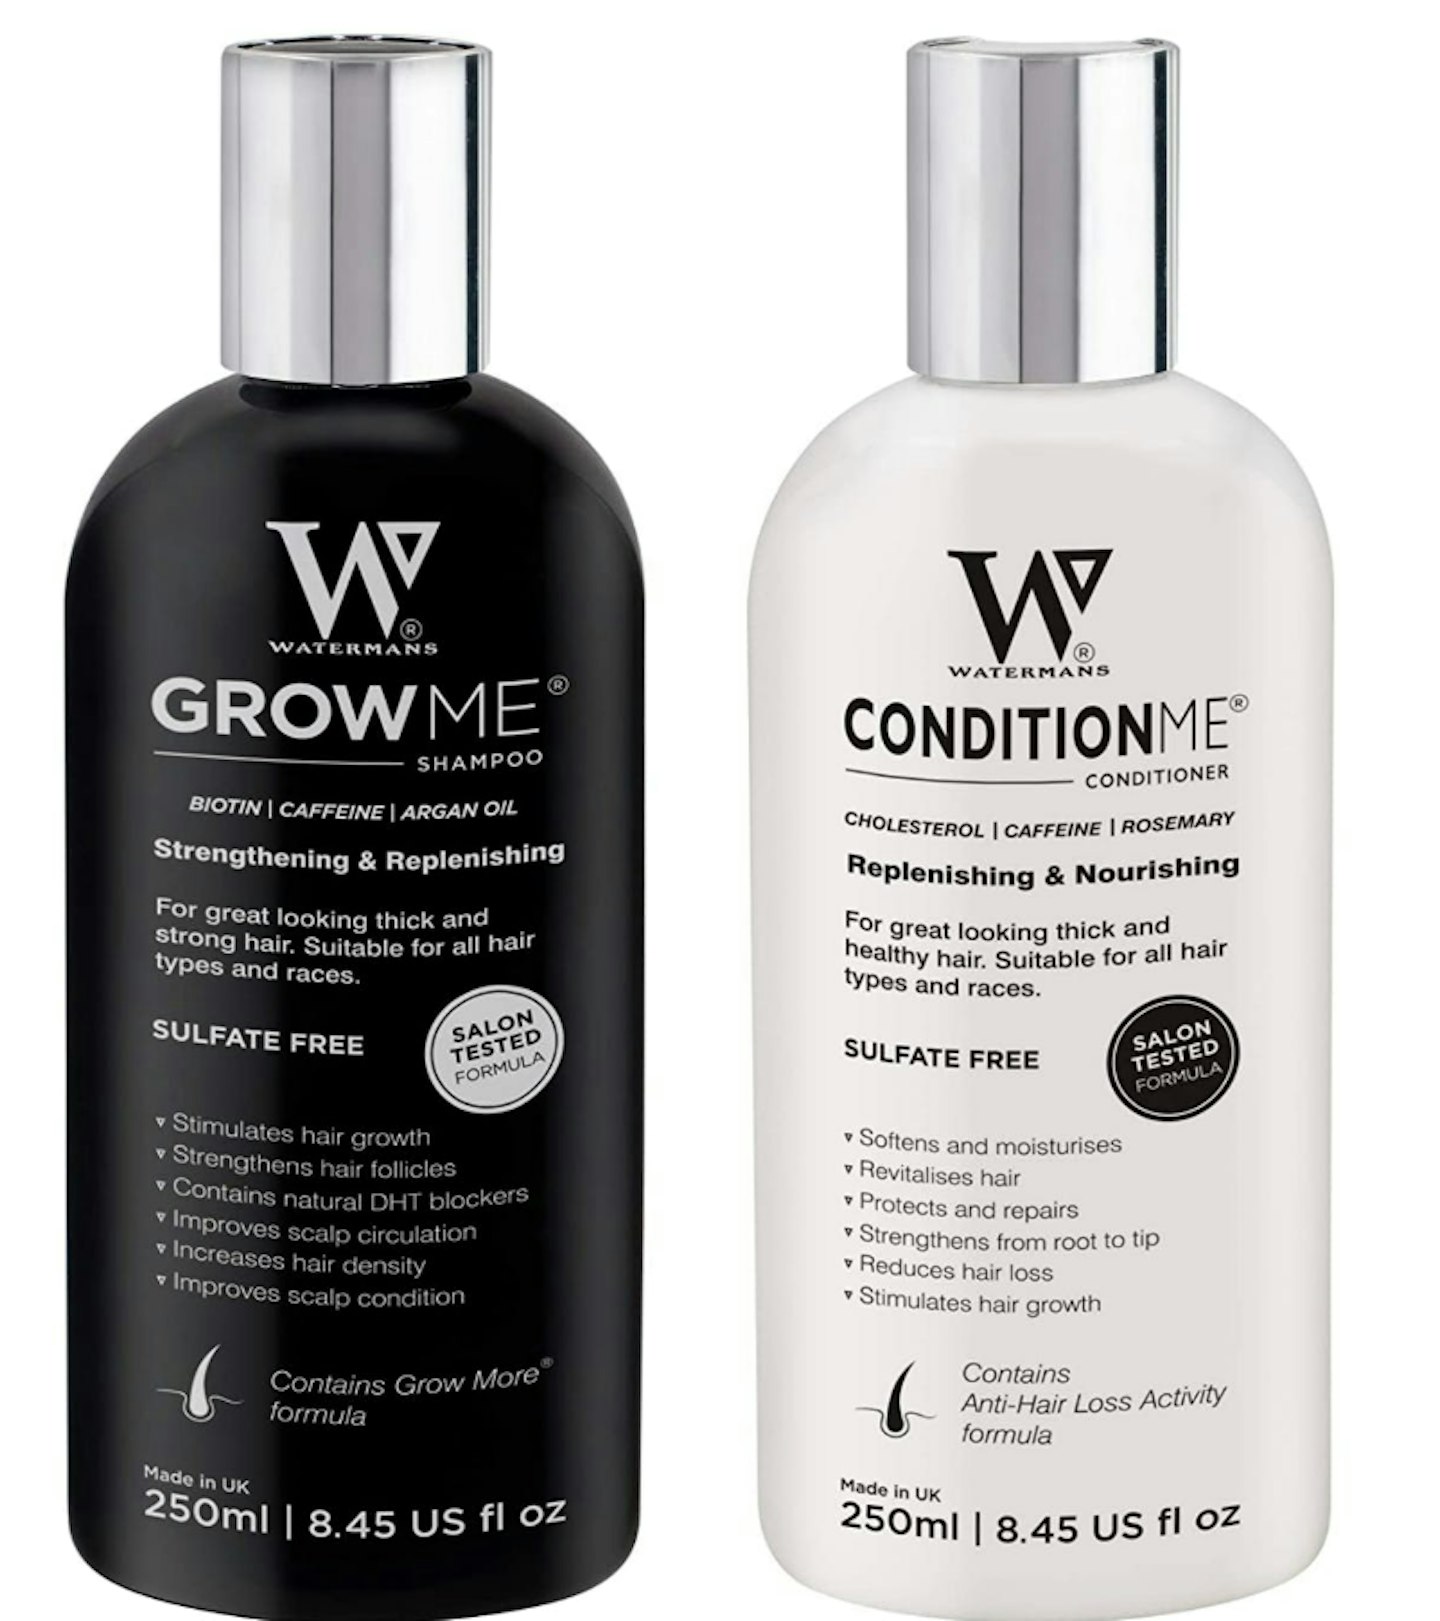 Watermans Hair Growth Shampoo and Conditioner